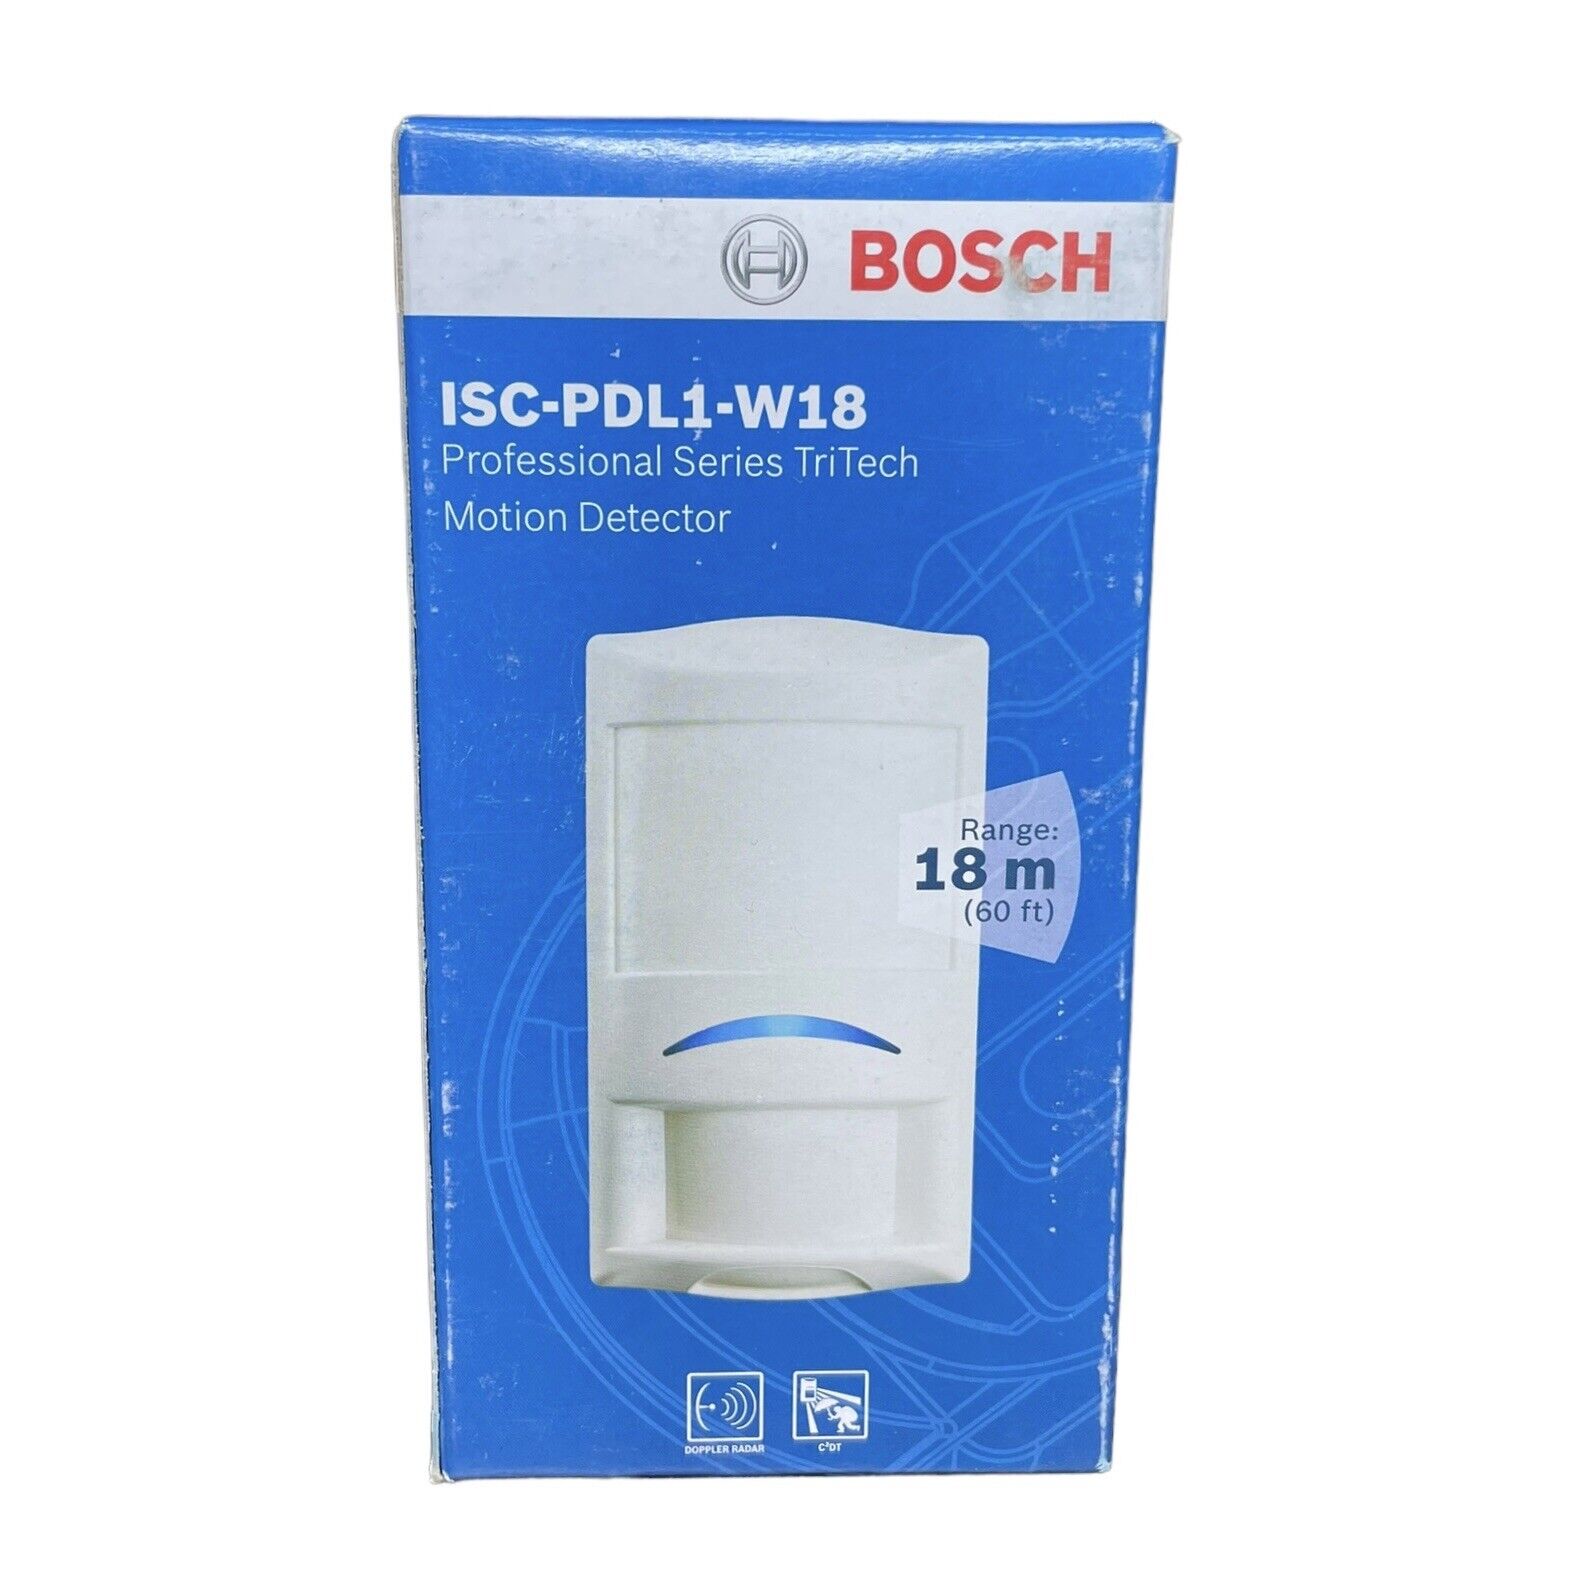 Bosch ISC-PDL1-W18 Professional Series TriTech Motion Detector